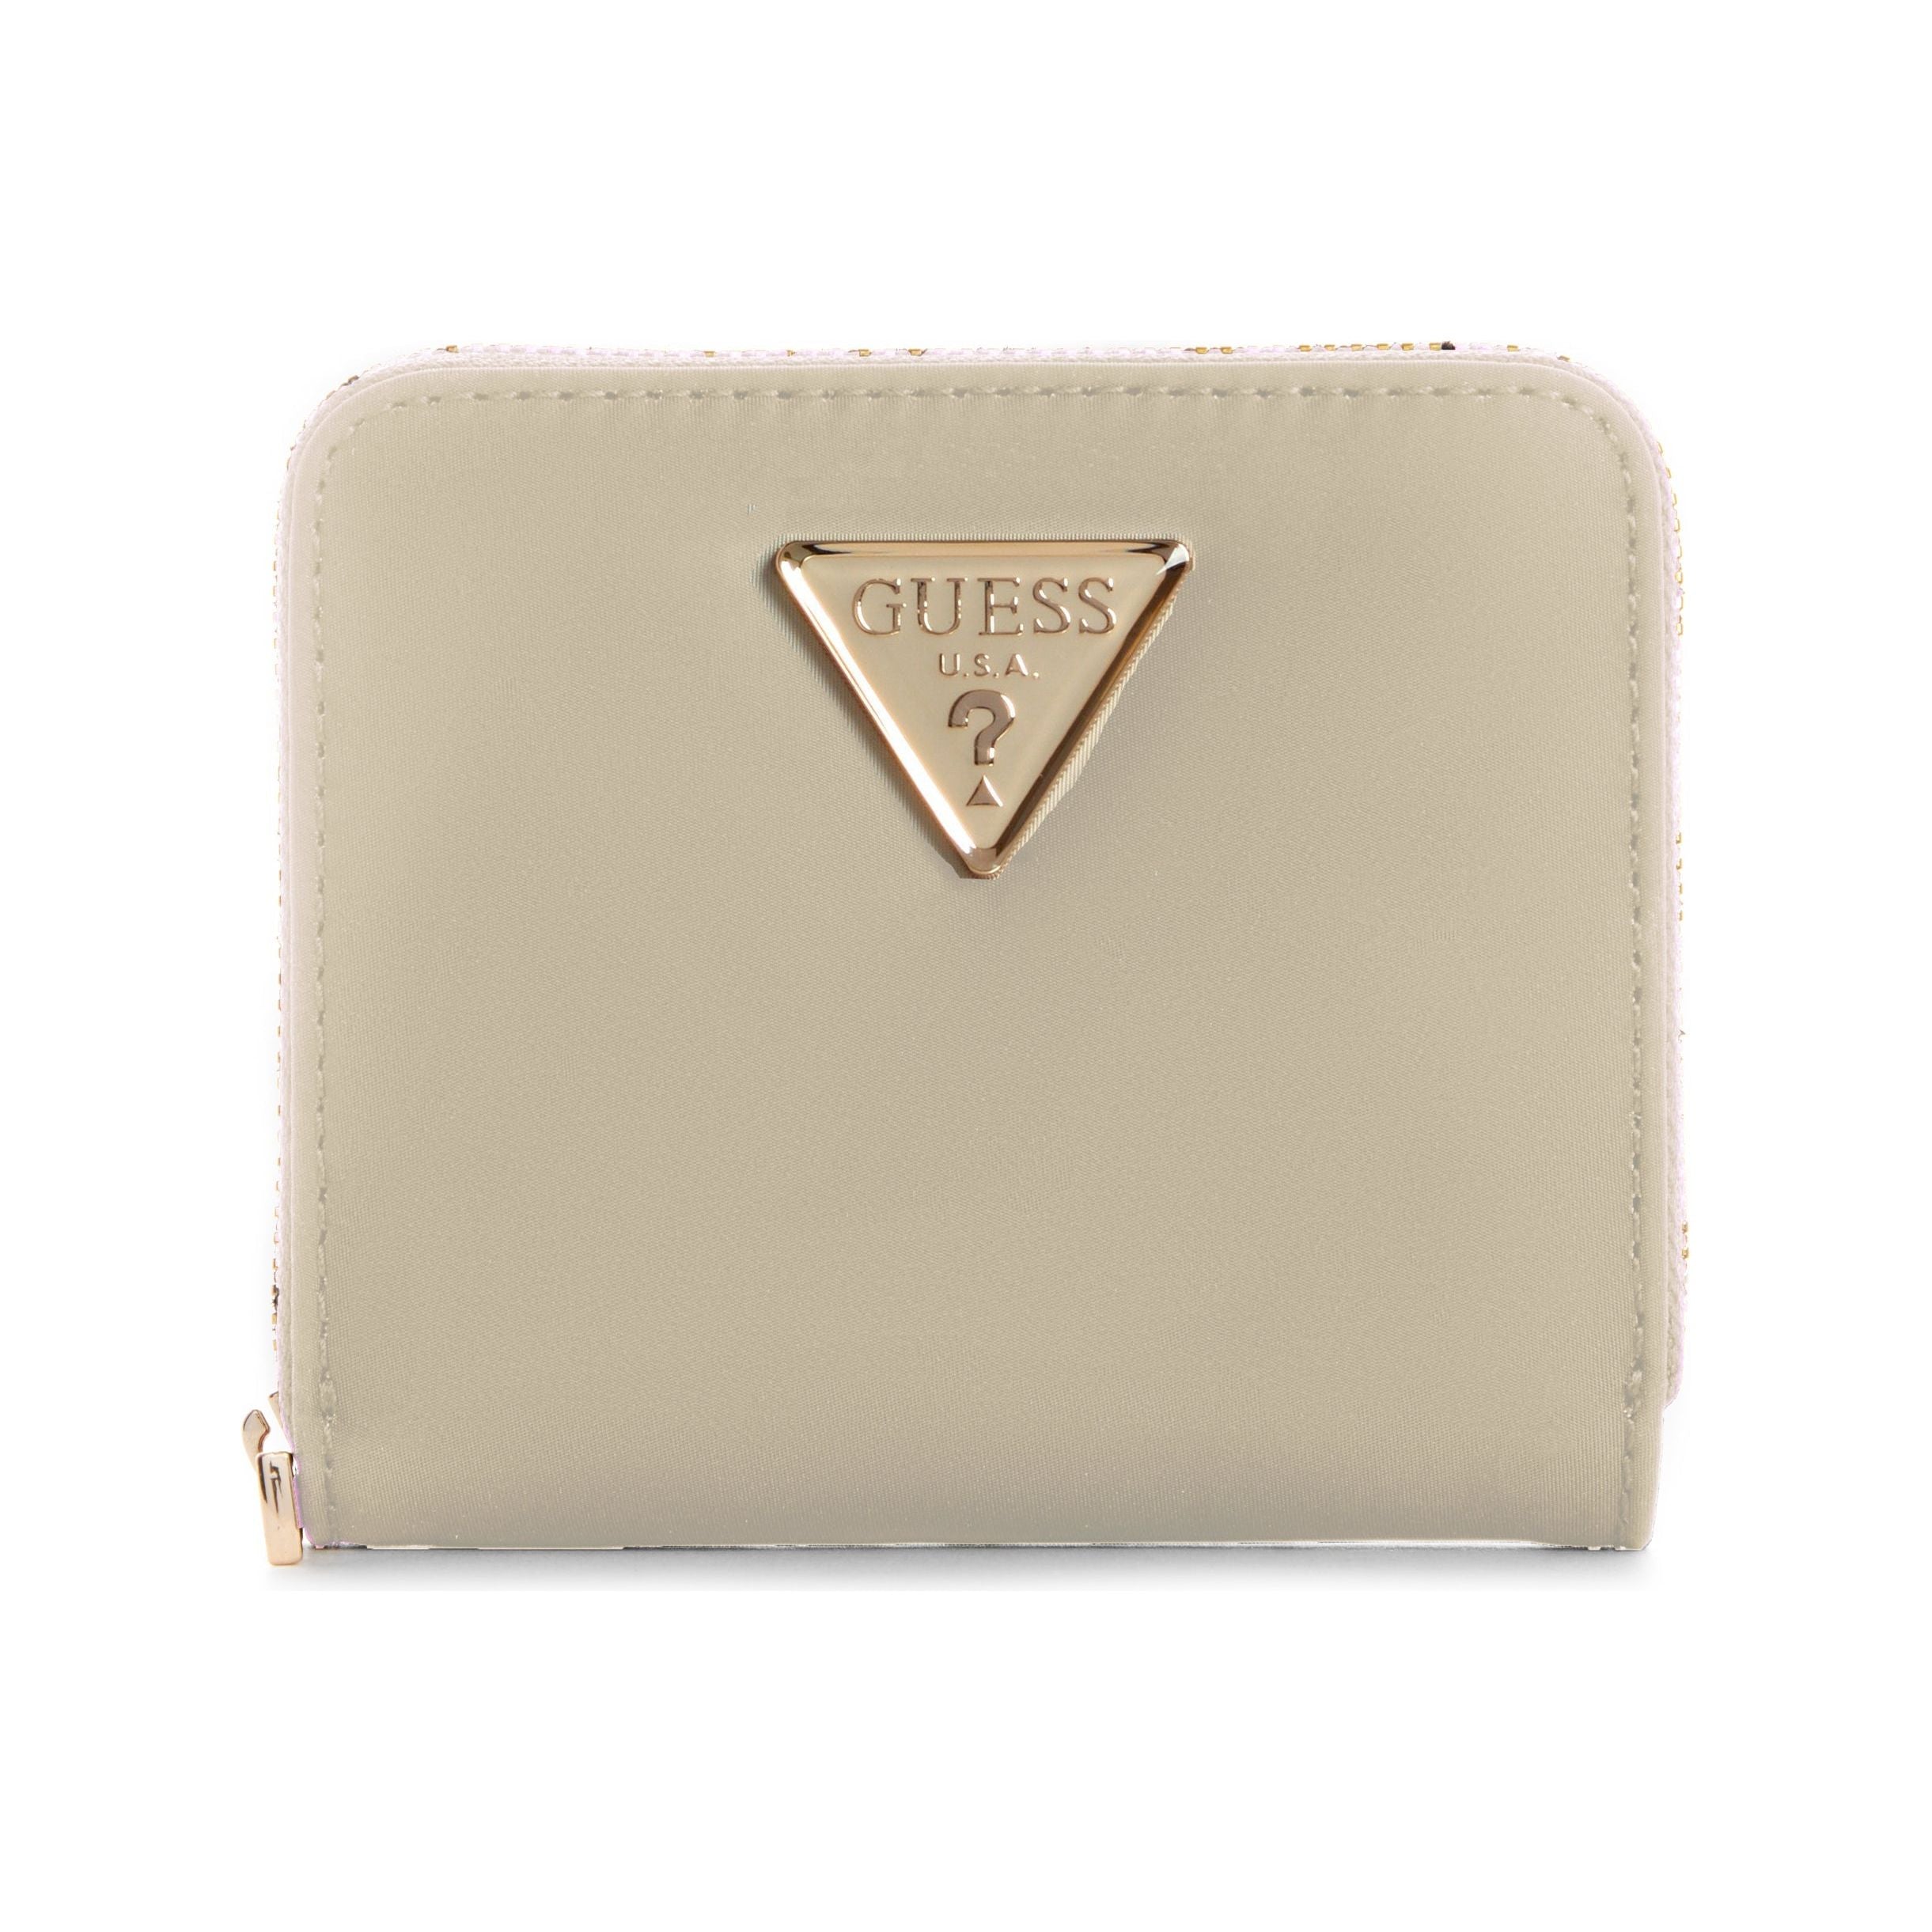 Guess - Eco Gemma Zip Around Wallet in Taupe